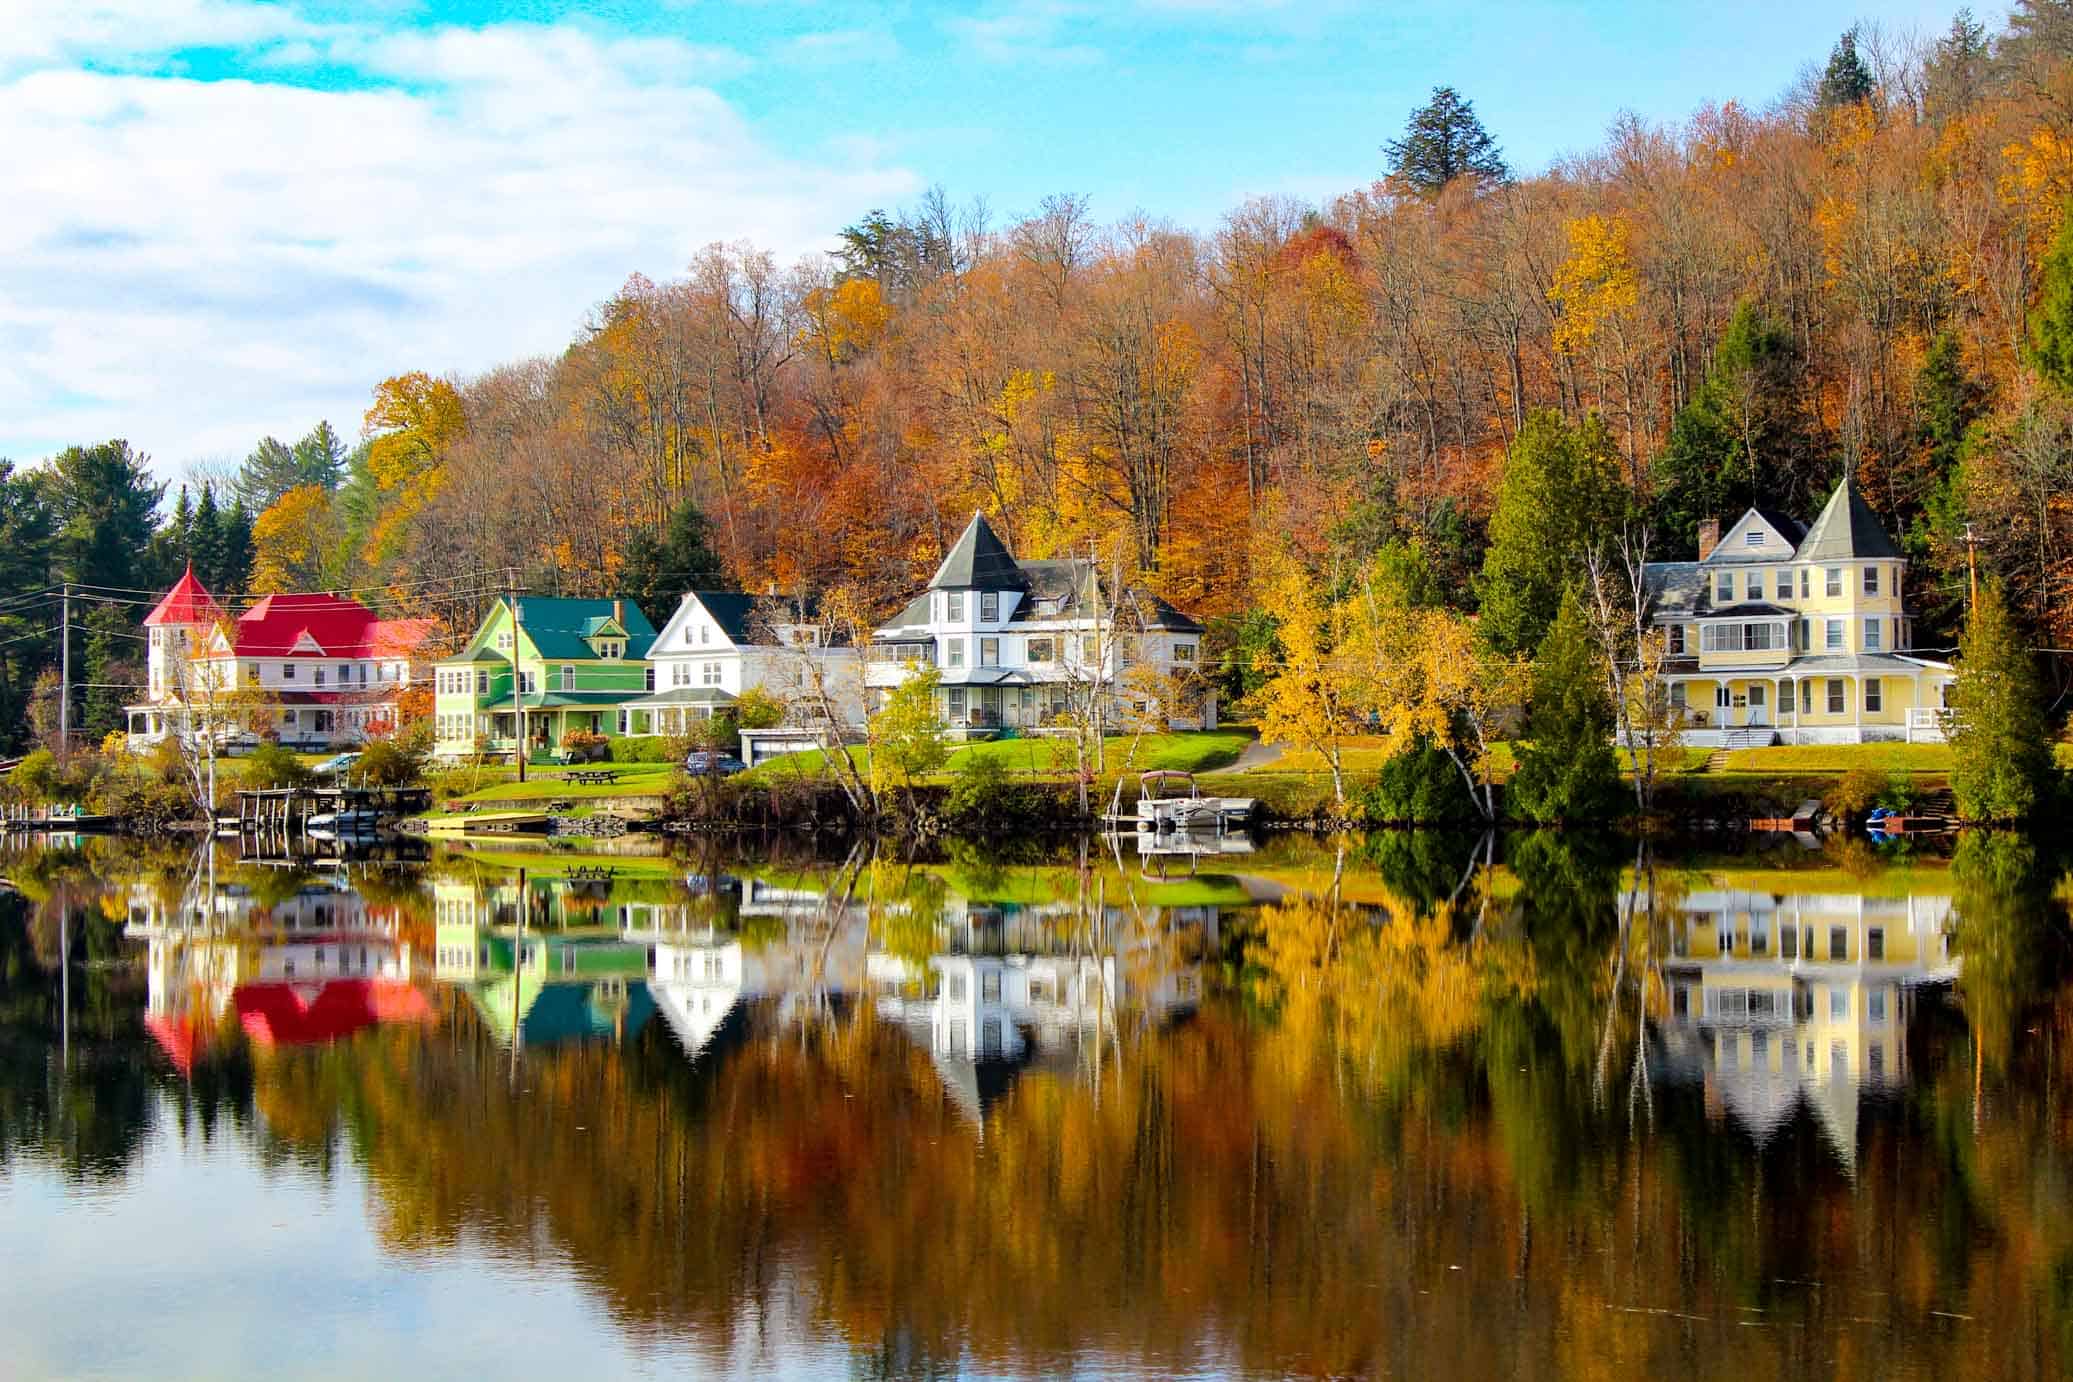 Beautiful large homes reflecting in the water on a colourful fall day